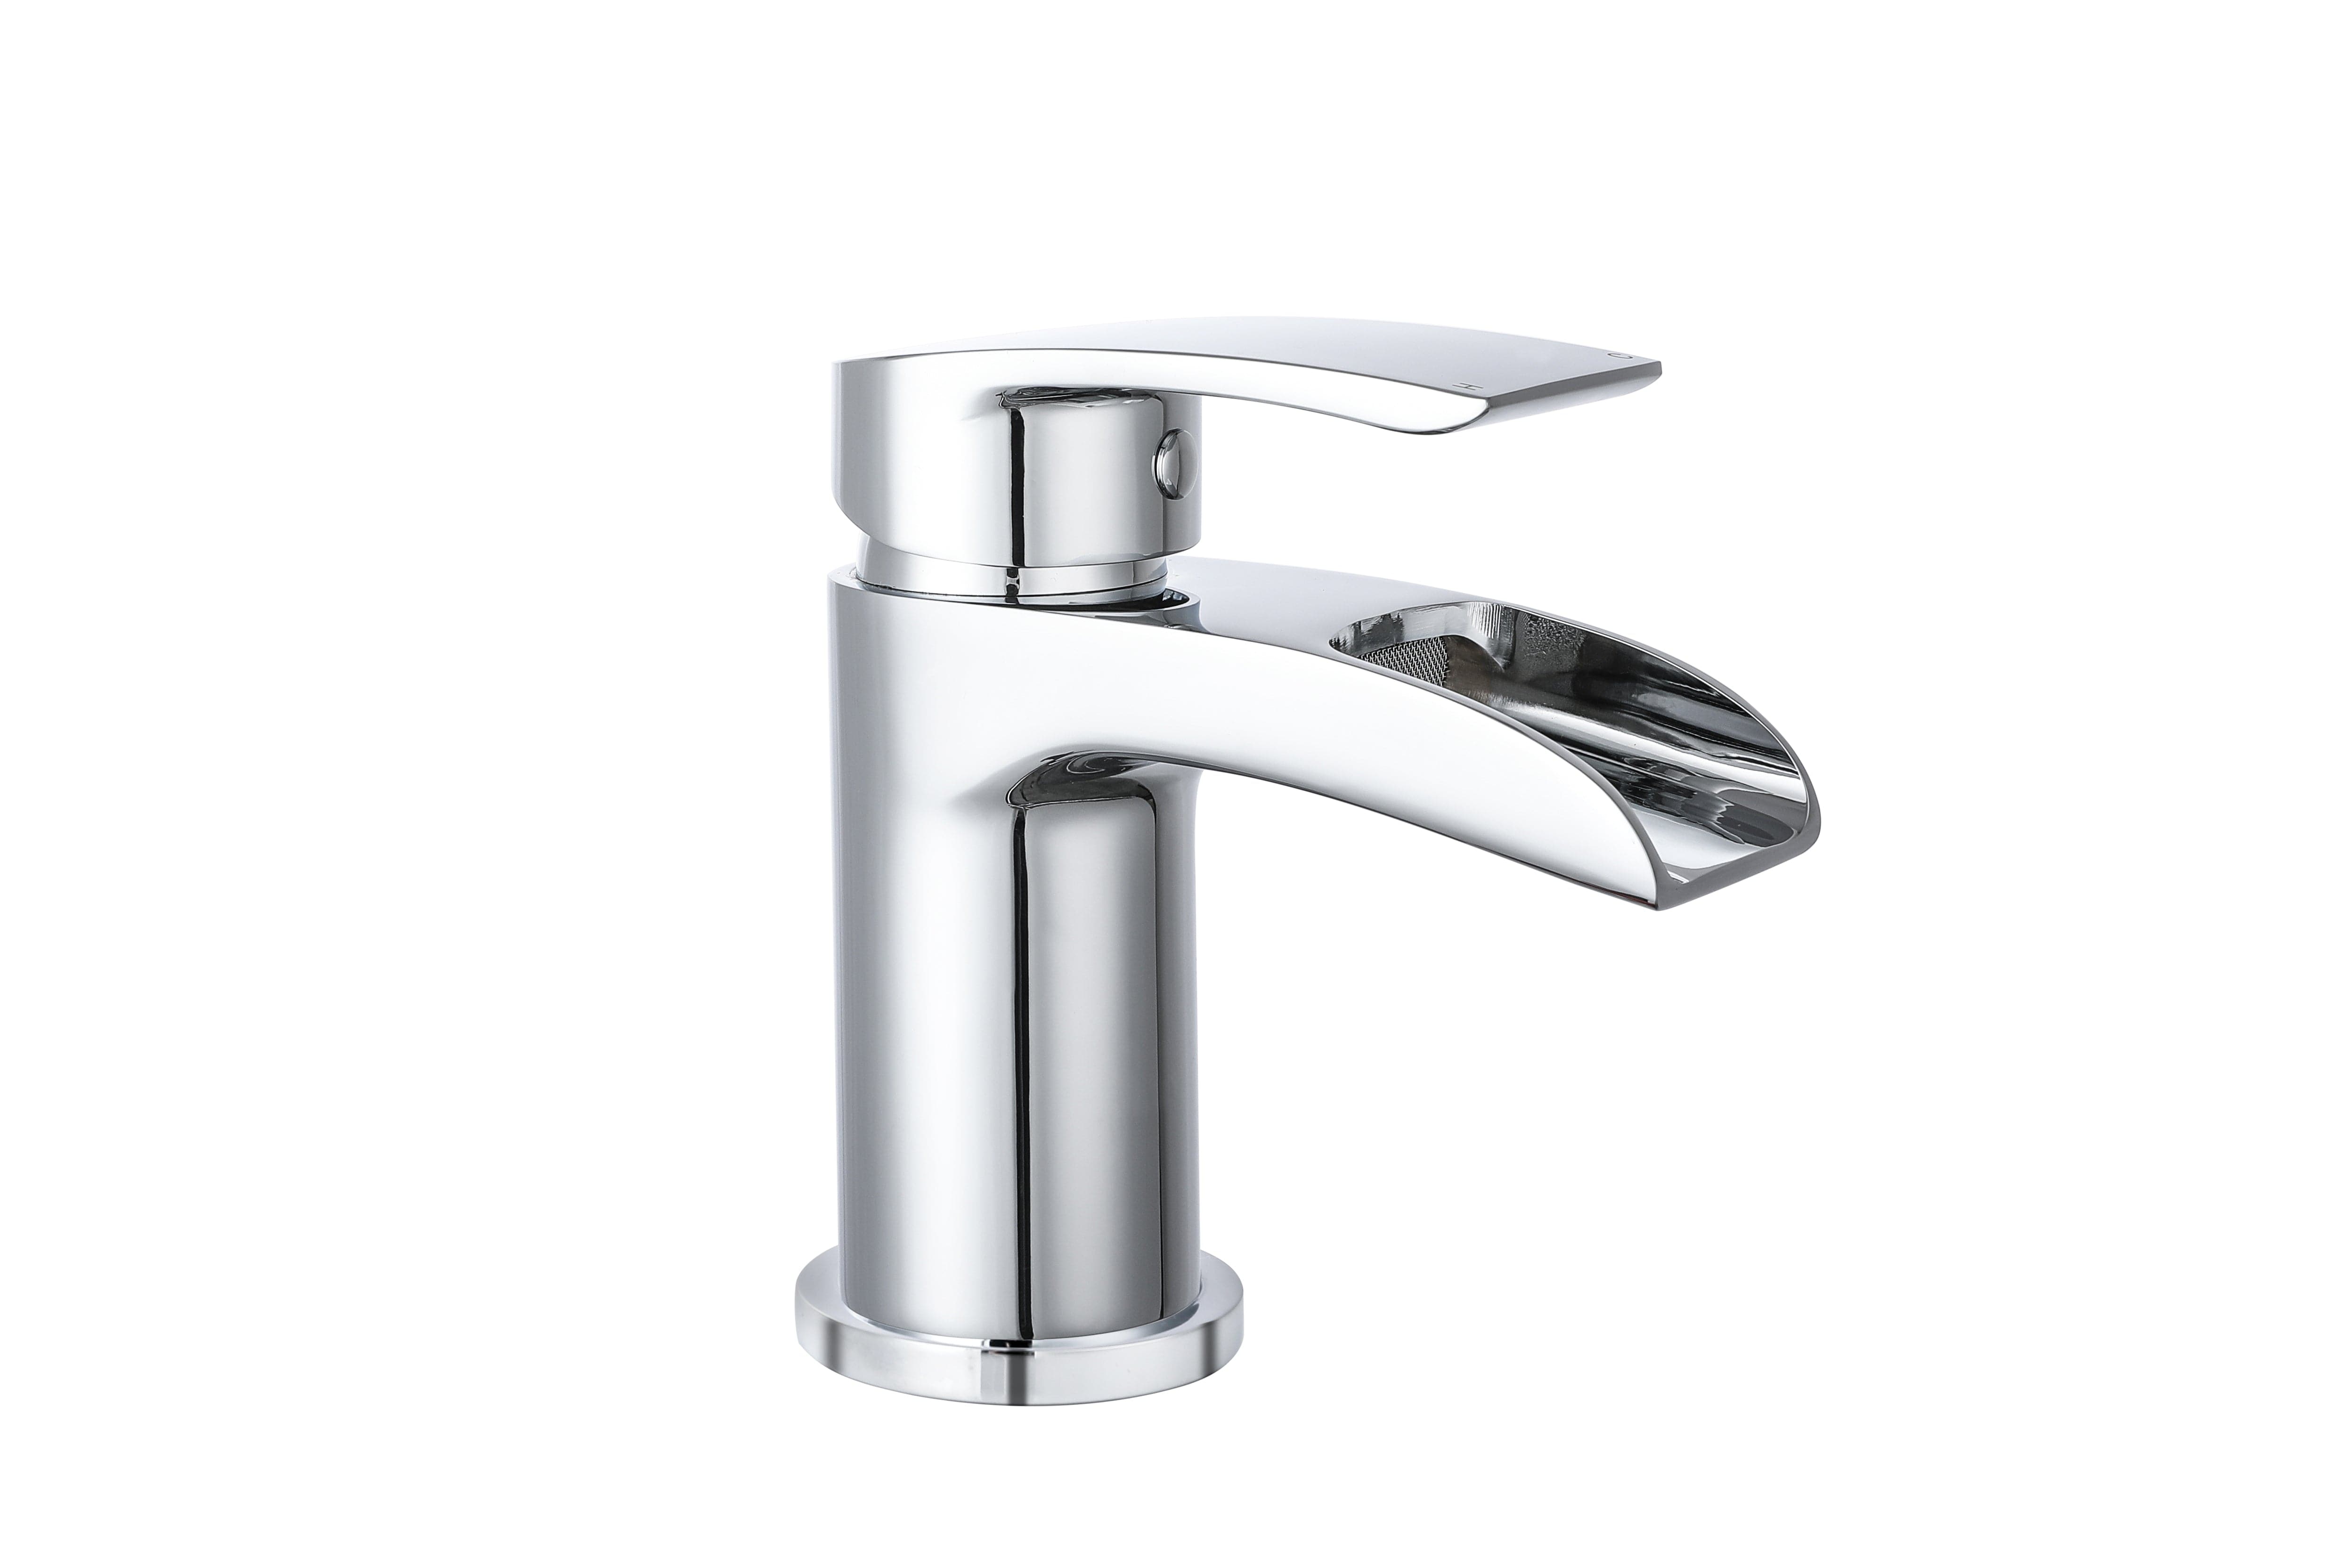 Symphony Round Waterfall Mono Basin Mixer Tap with Waste - Chrome